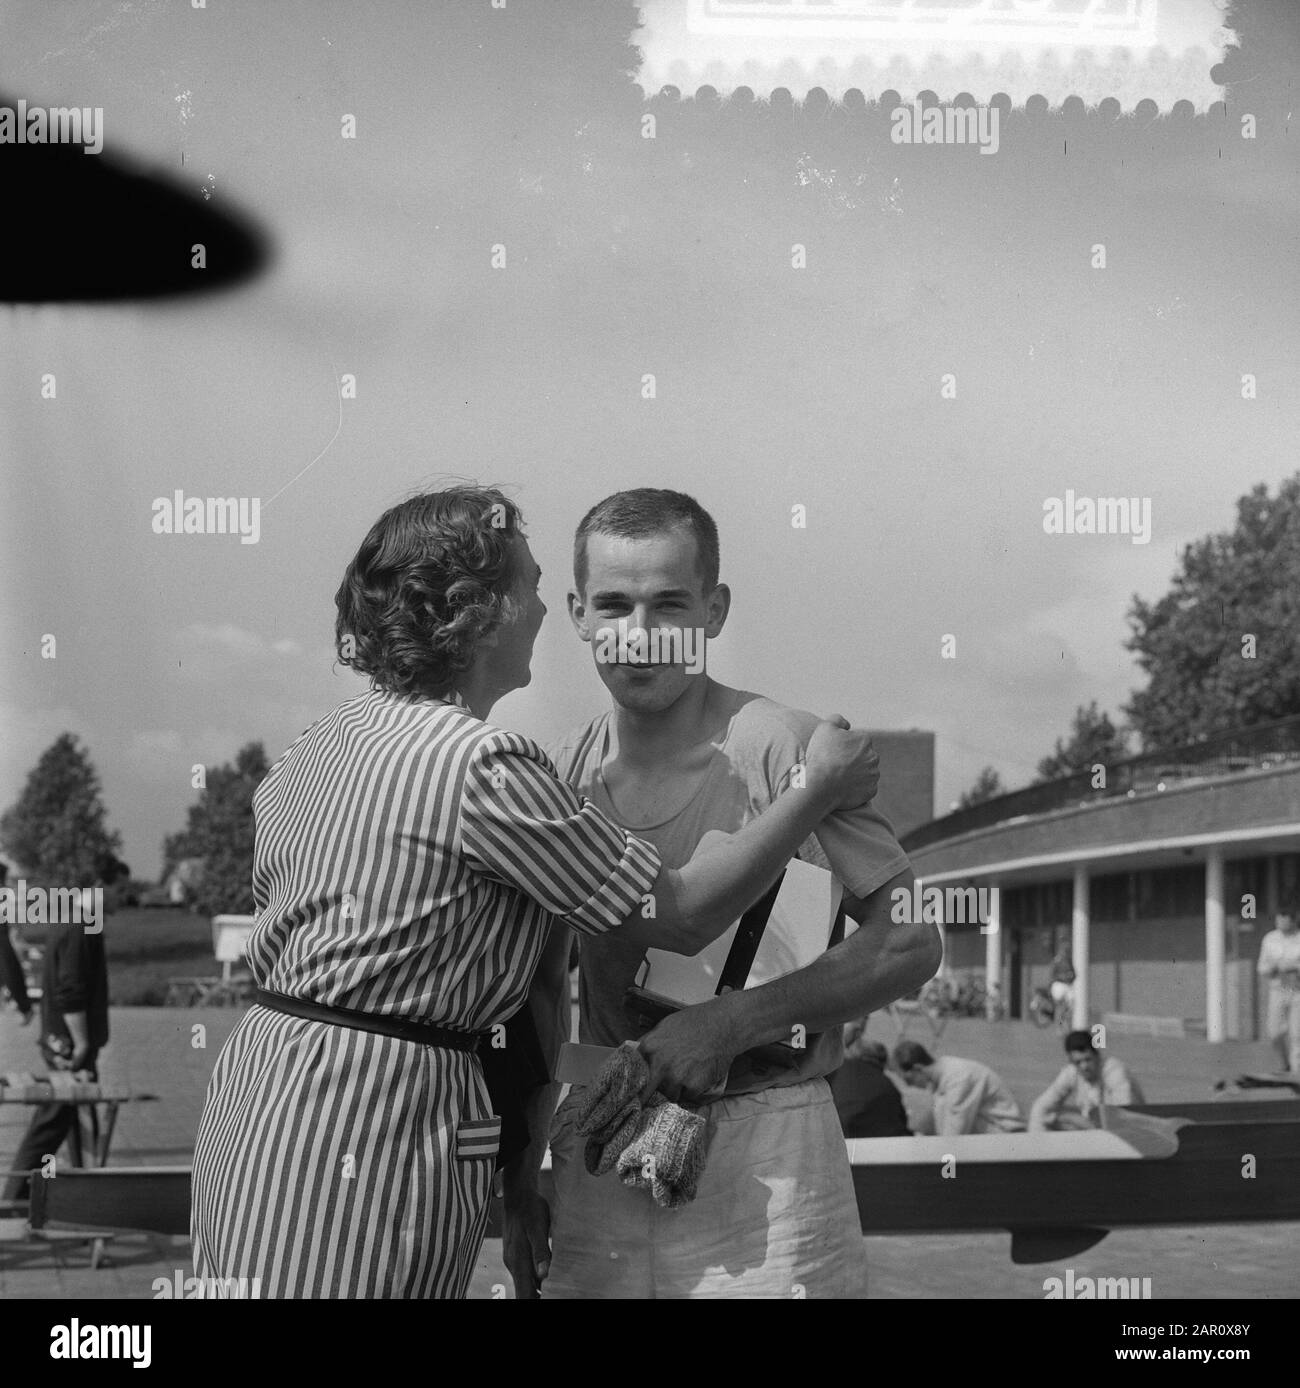 European rowing championships Bosbaan, Blaisse is lucky by unknown woman Date: 9 August 1964 Location: Amsterdam, Amsterdamse Bos, Bosbaan, Noord-Holland Keywords: Roeies, Championships Stock Photo